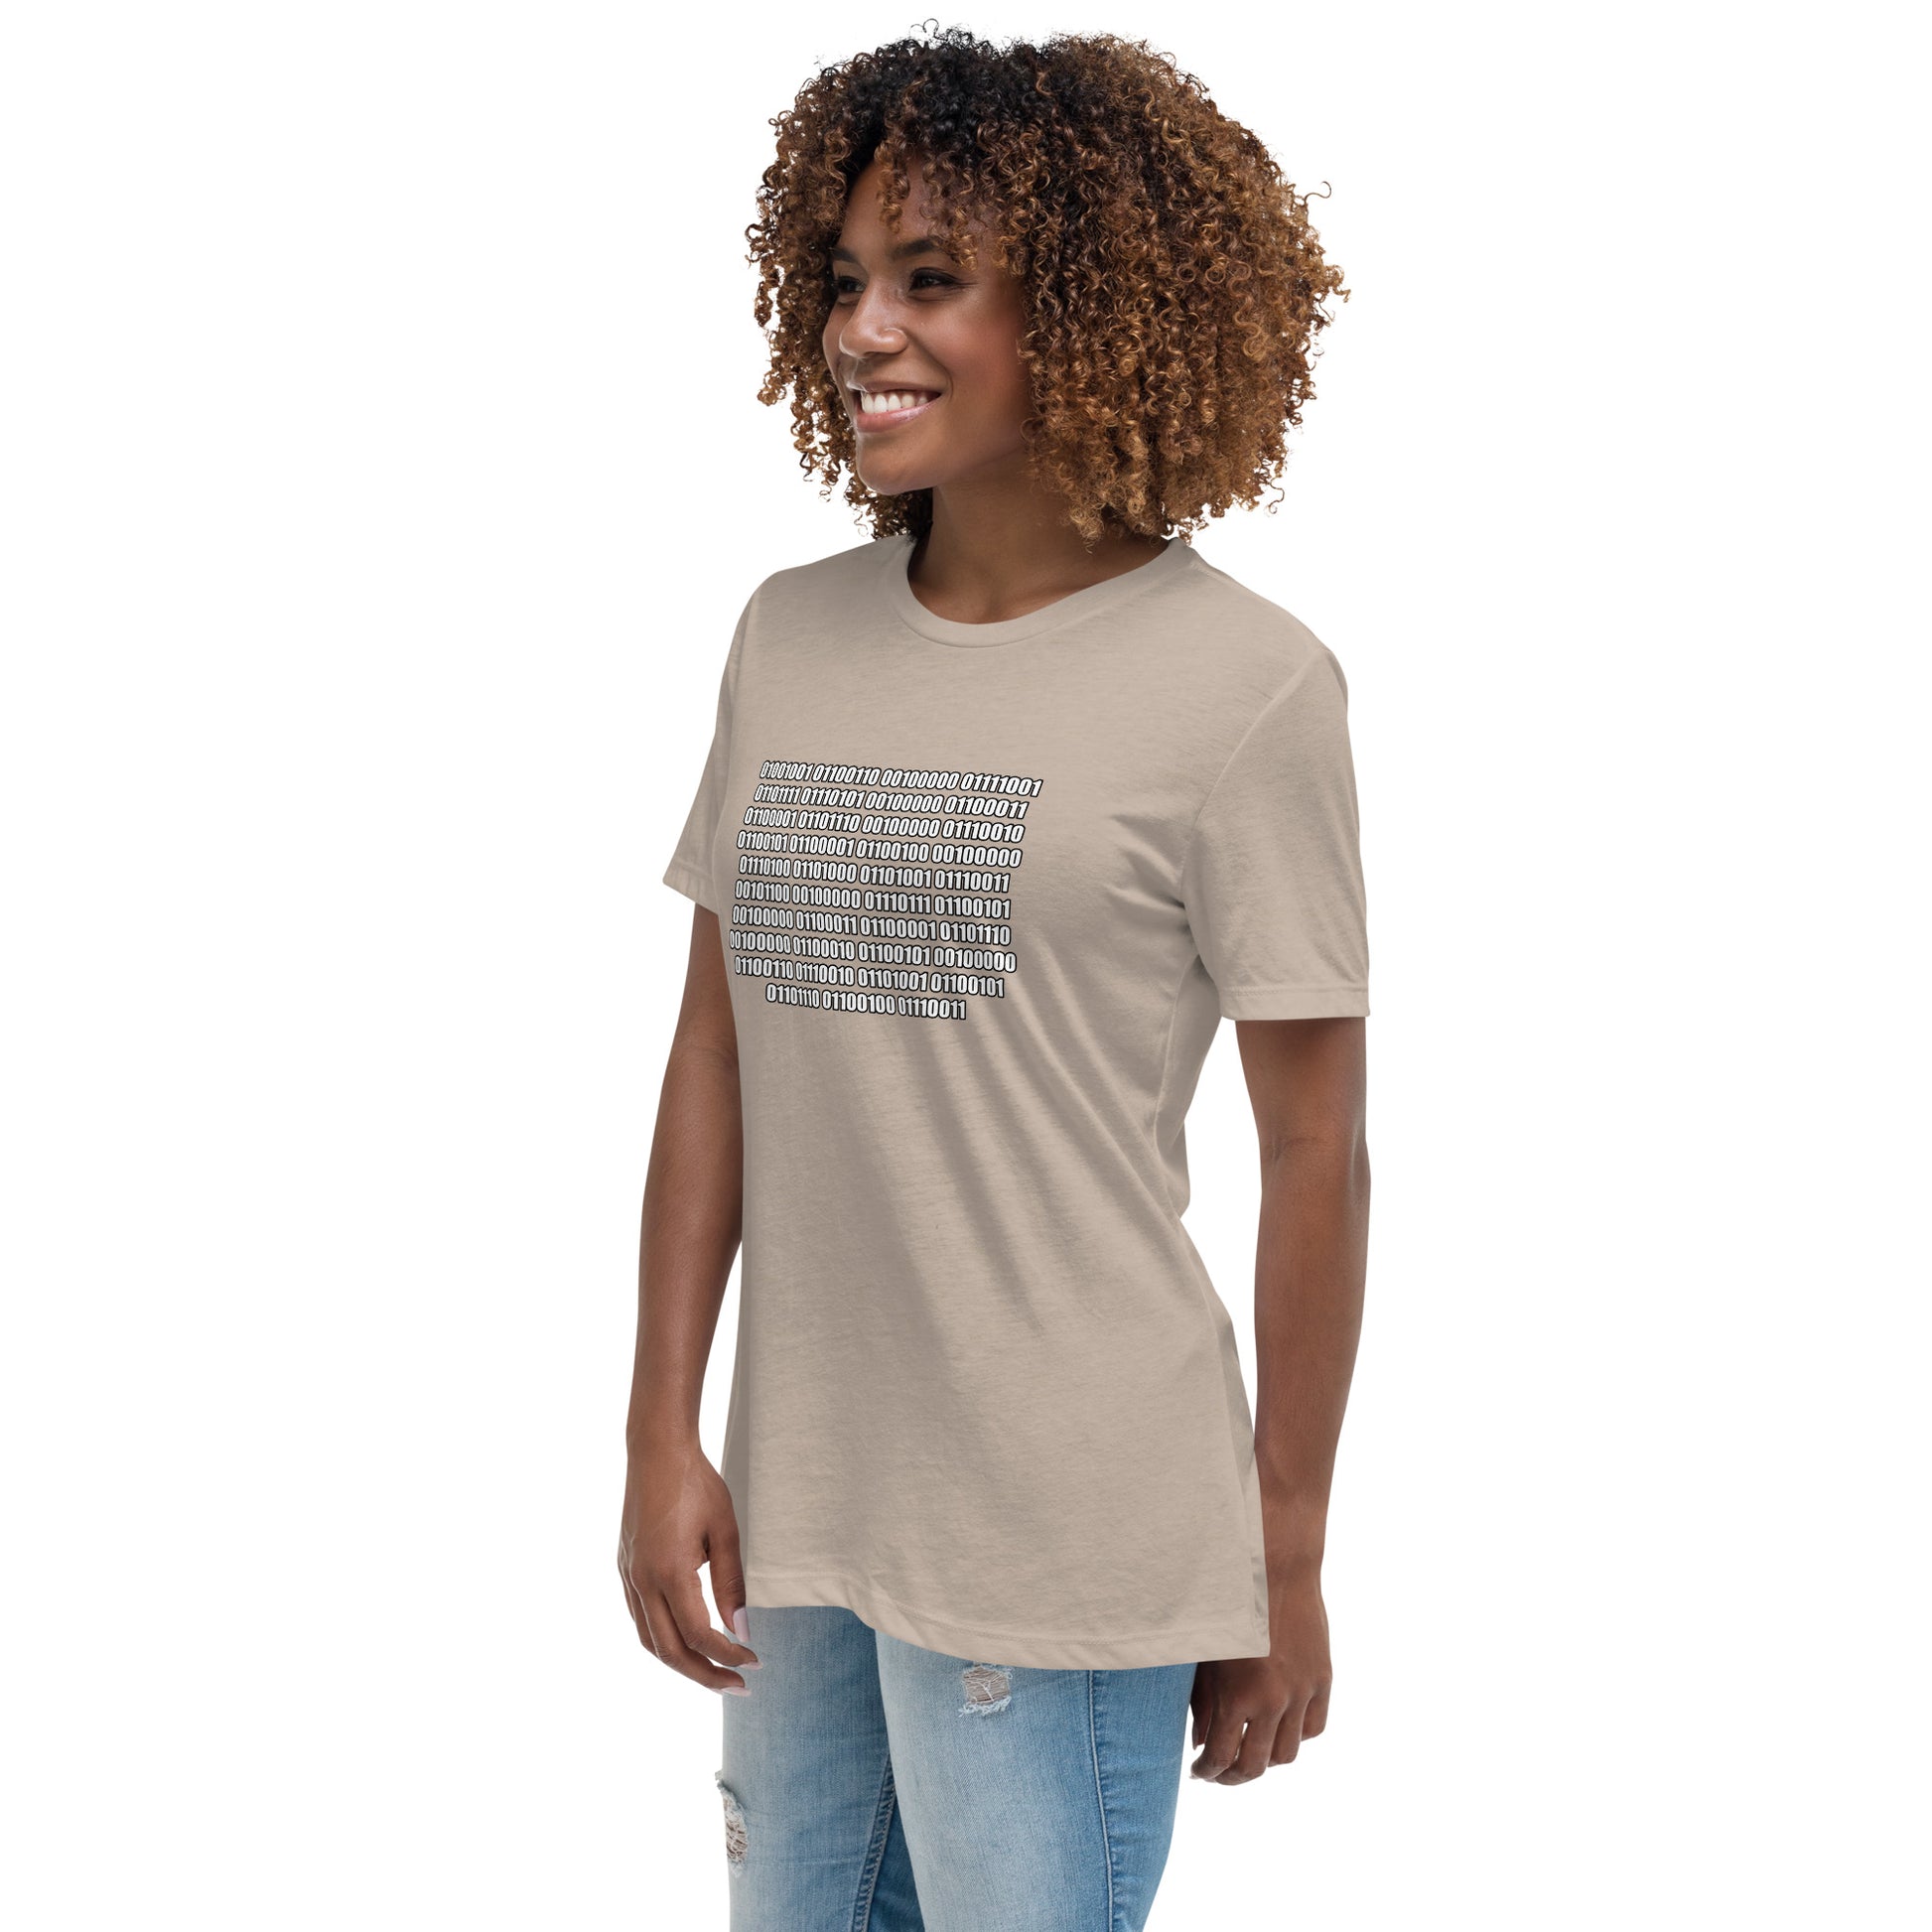 Woman with stone t-shirt with binary code "If you can read this"